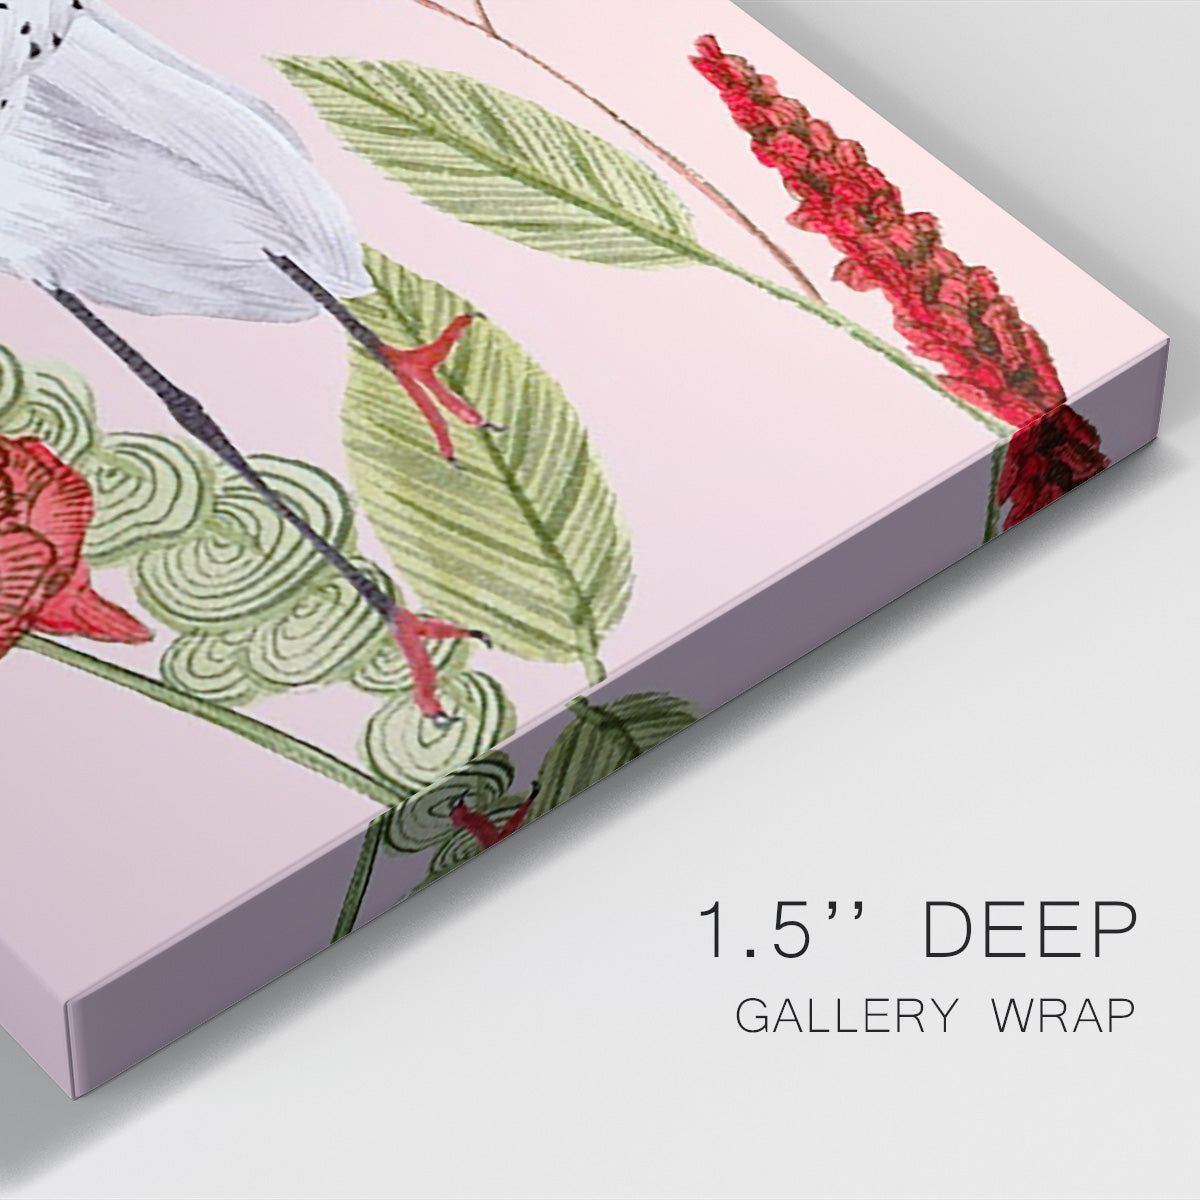 Birds in Motion III Premium Gallery Wrapped Canvas - Ready to Hang